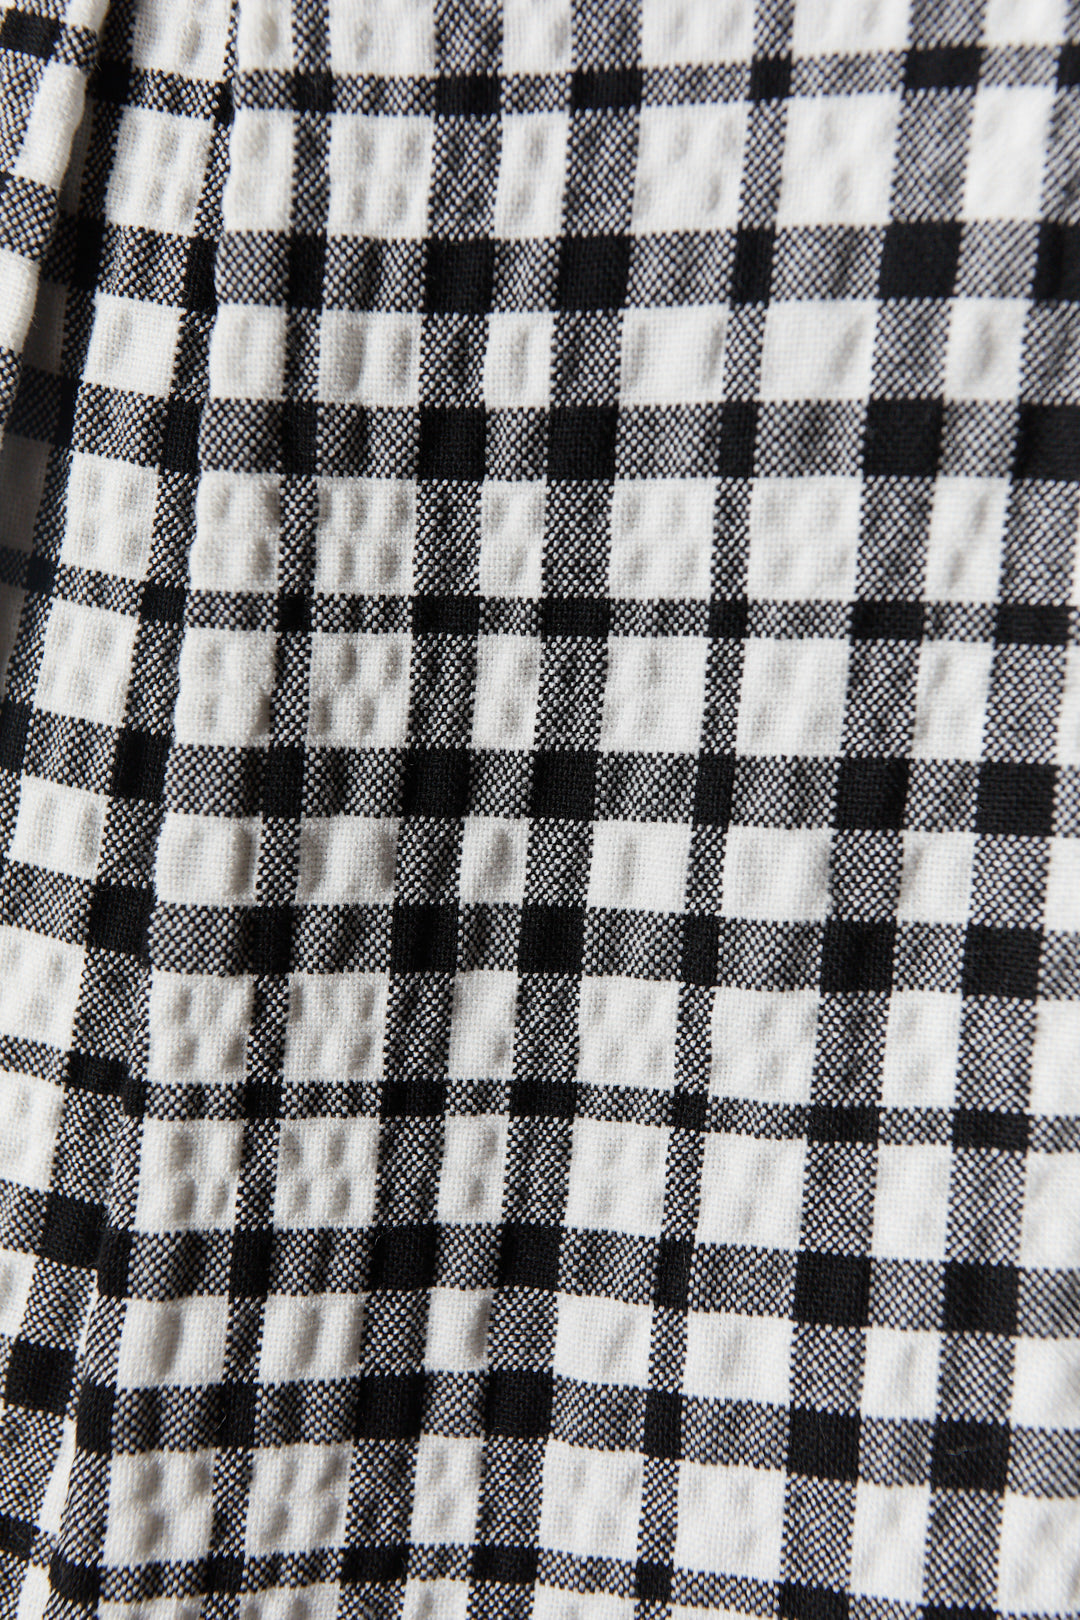 Black and white checked shirt | Barty